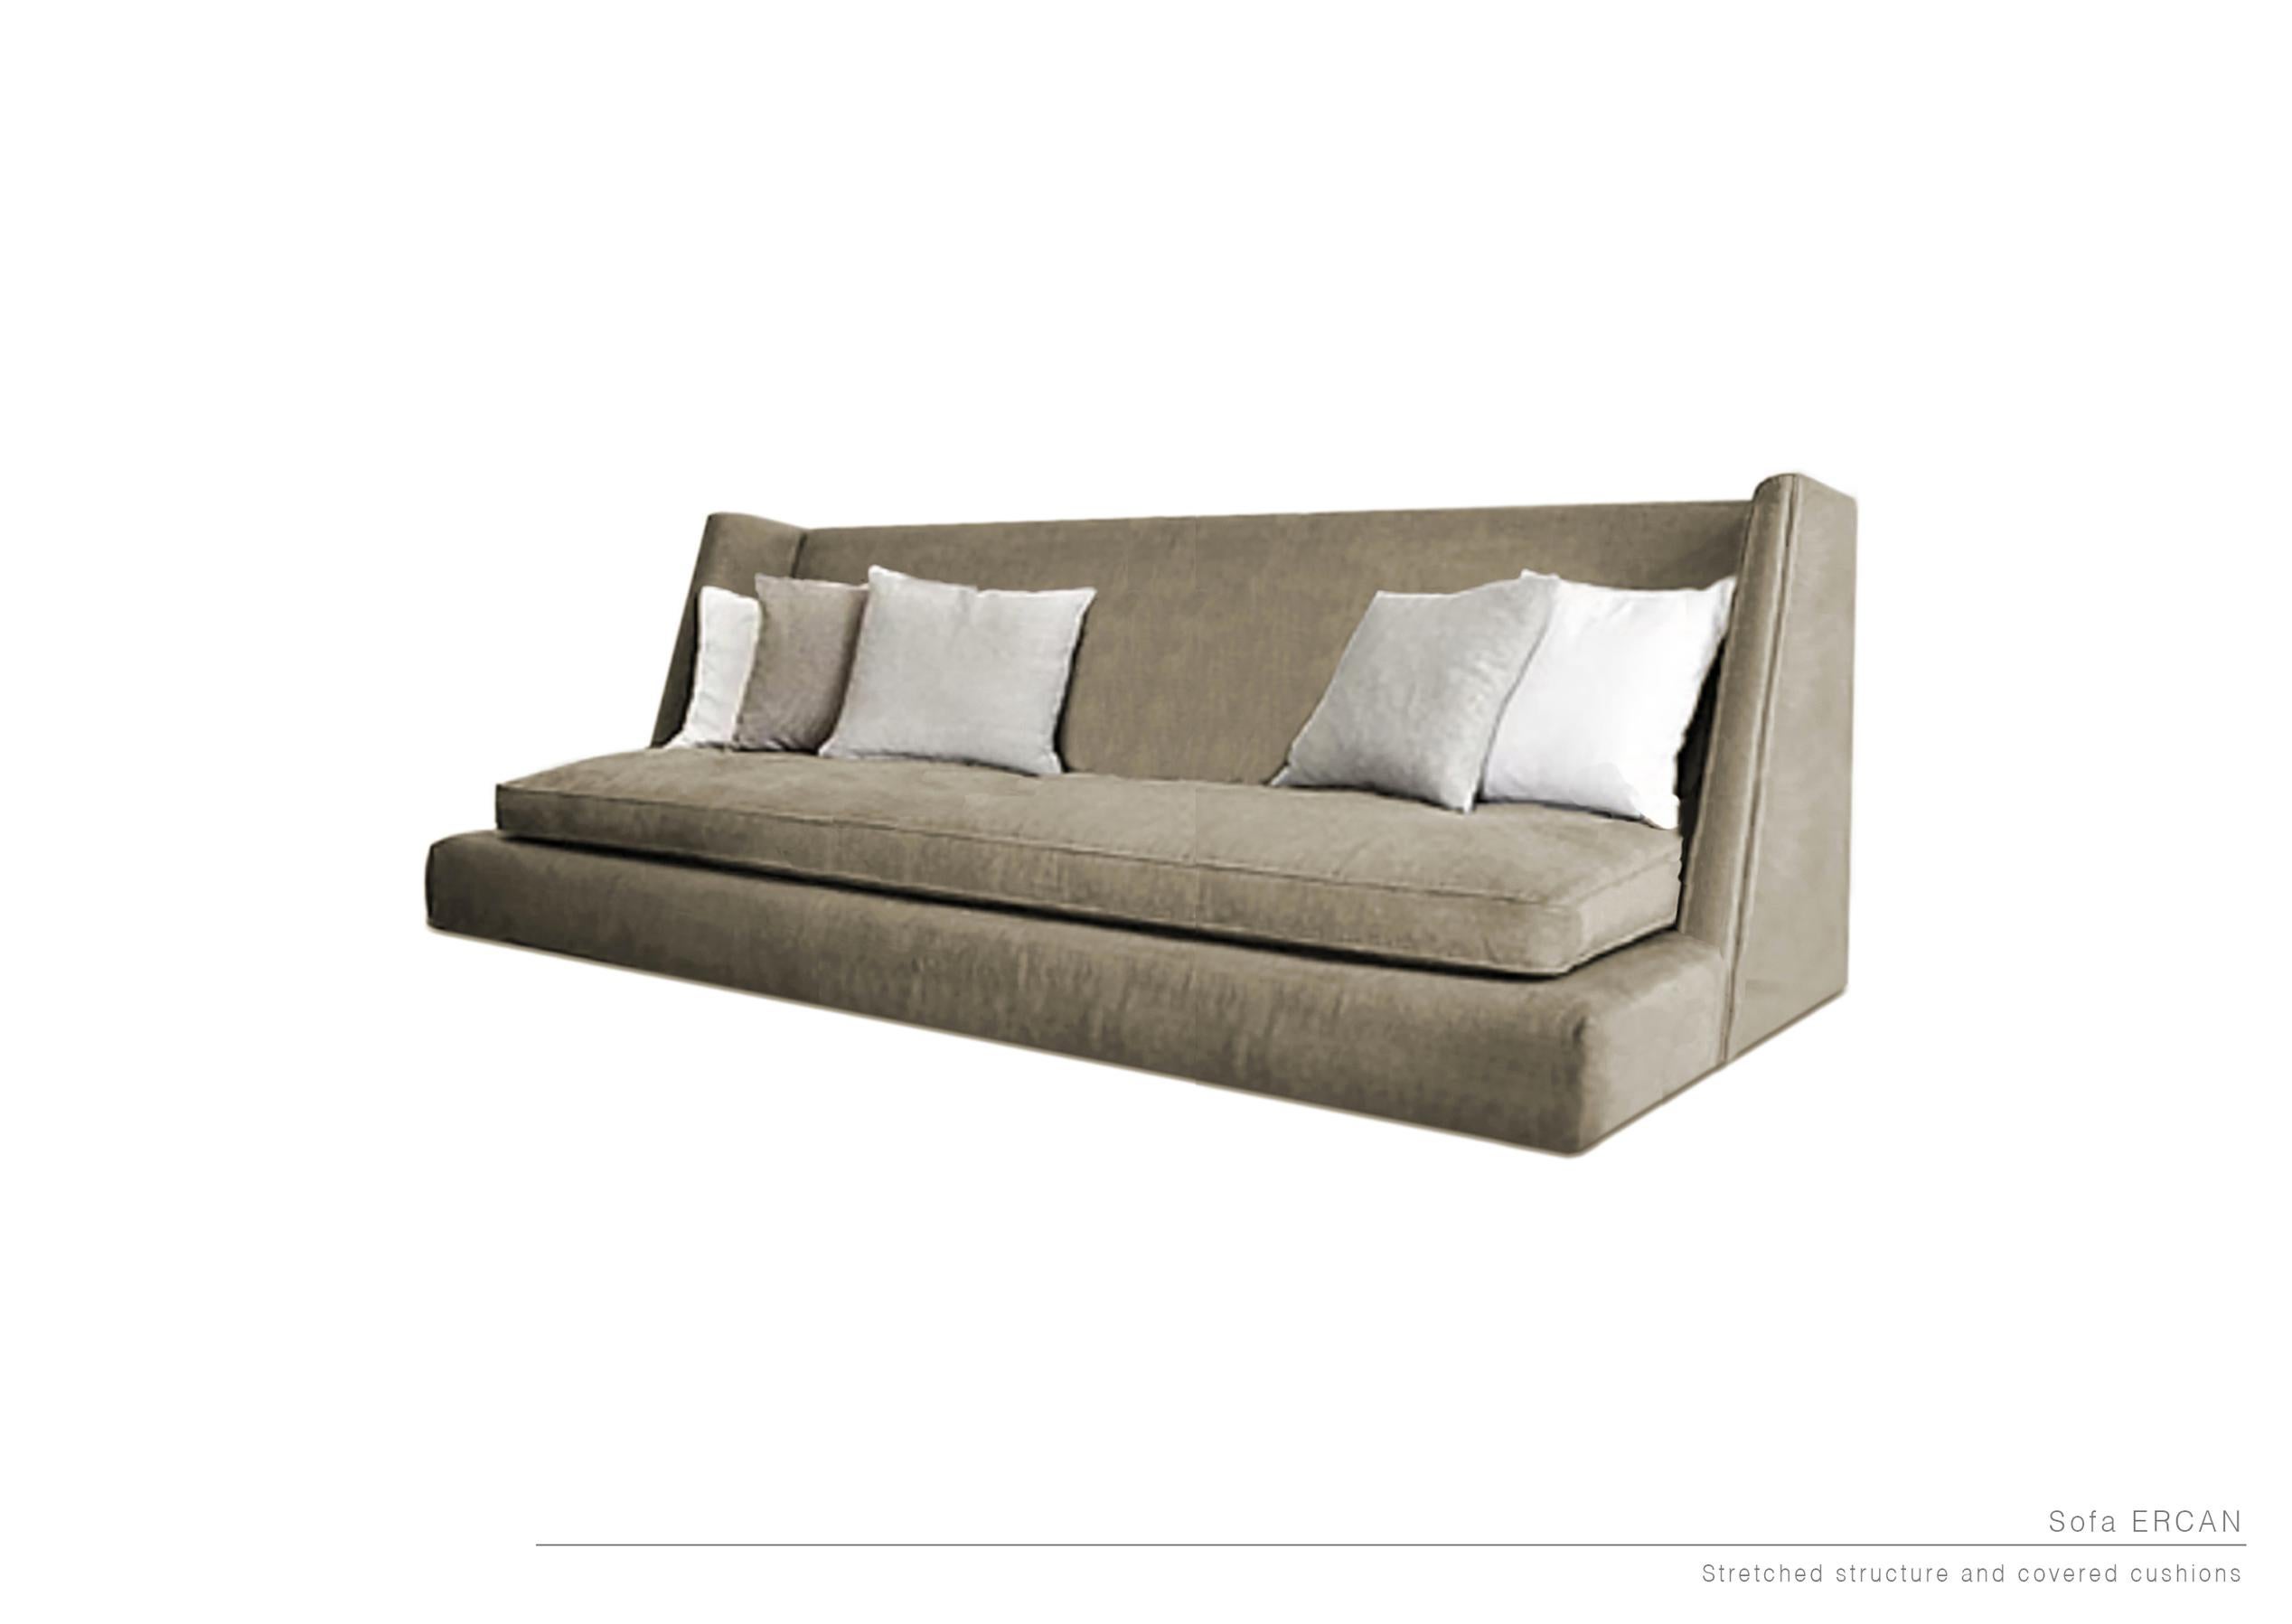 Ercan sofa by LK Edition
Dimensions: 310 x 105.5 x H 94.5 cm
Materials: Upholstered in Linen. 
Also available with linen cushions.

It is with the sense of detail and requirement, this research of the exception by the selection of noble